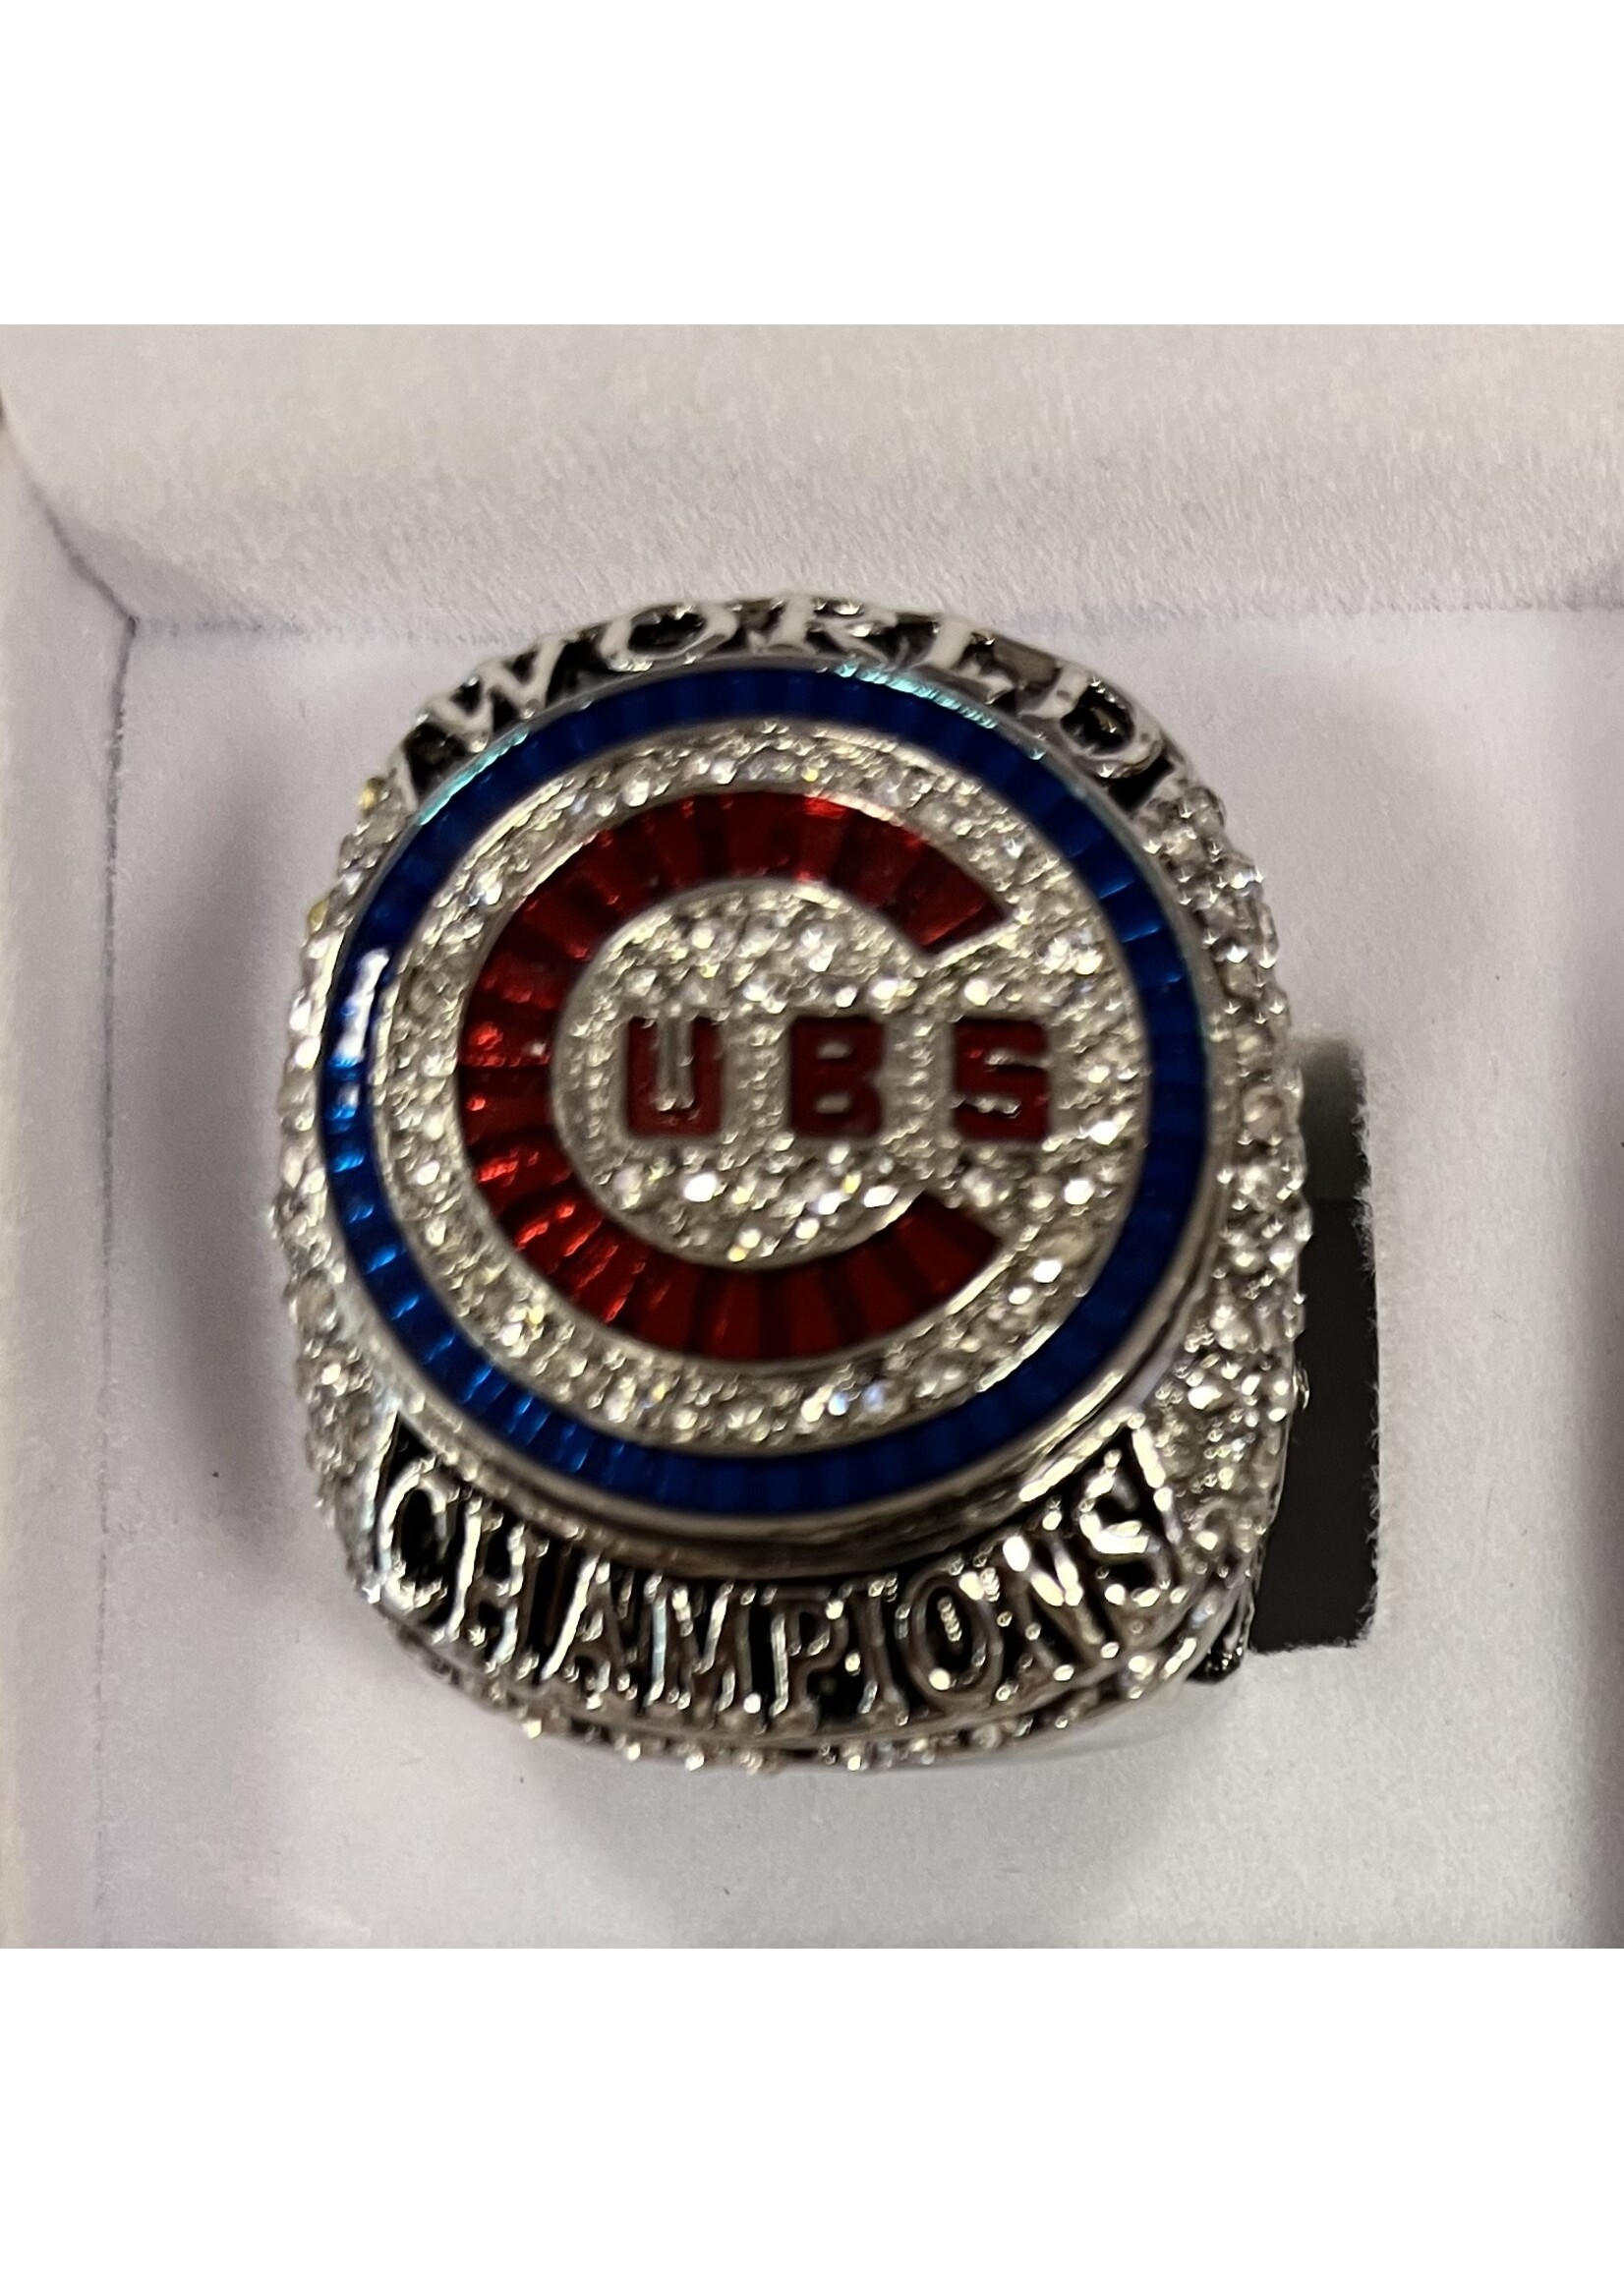 Cubs World Series Ring